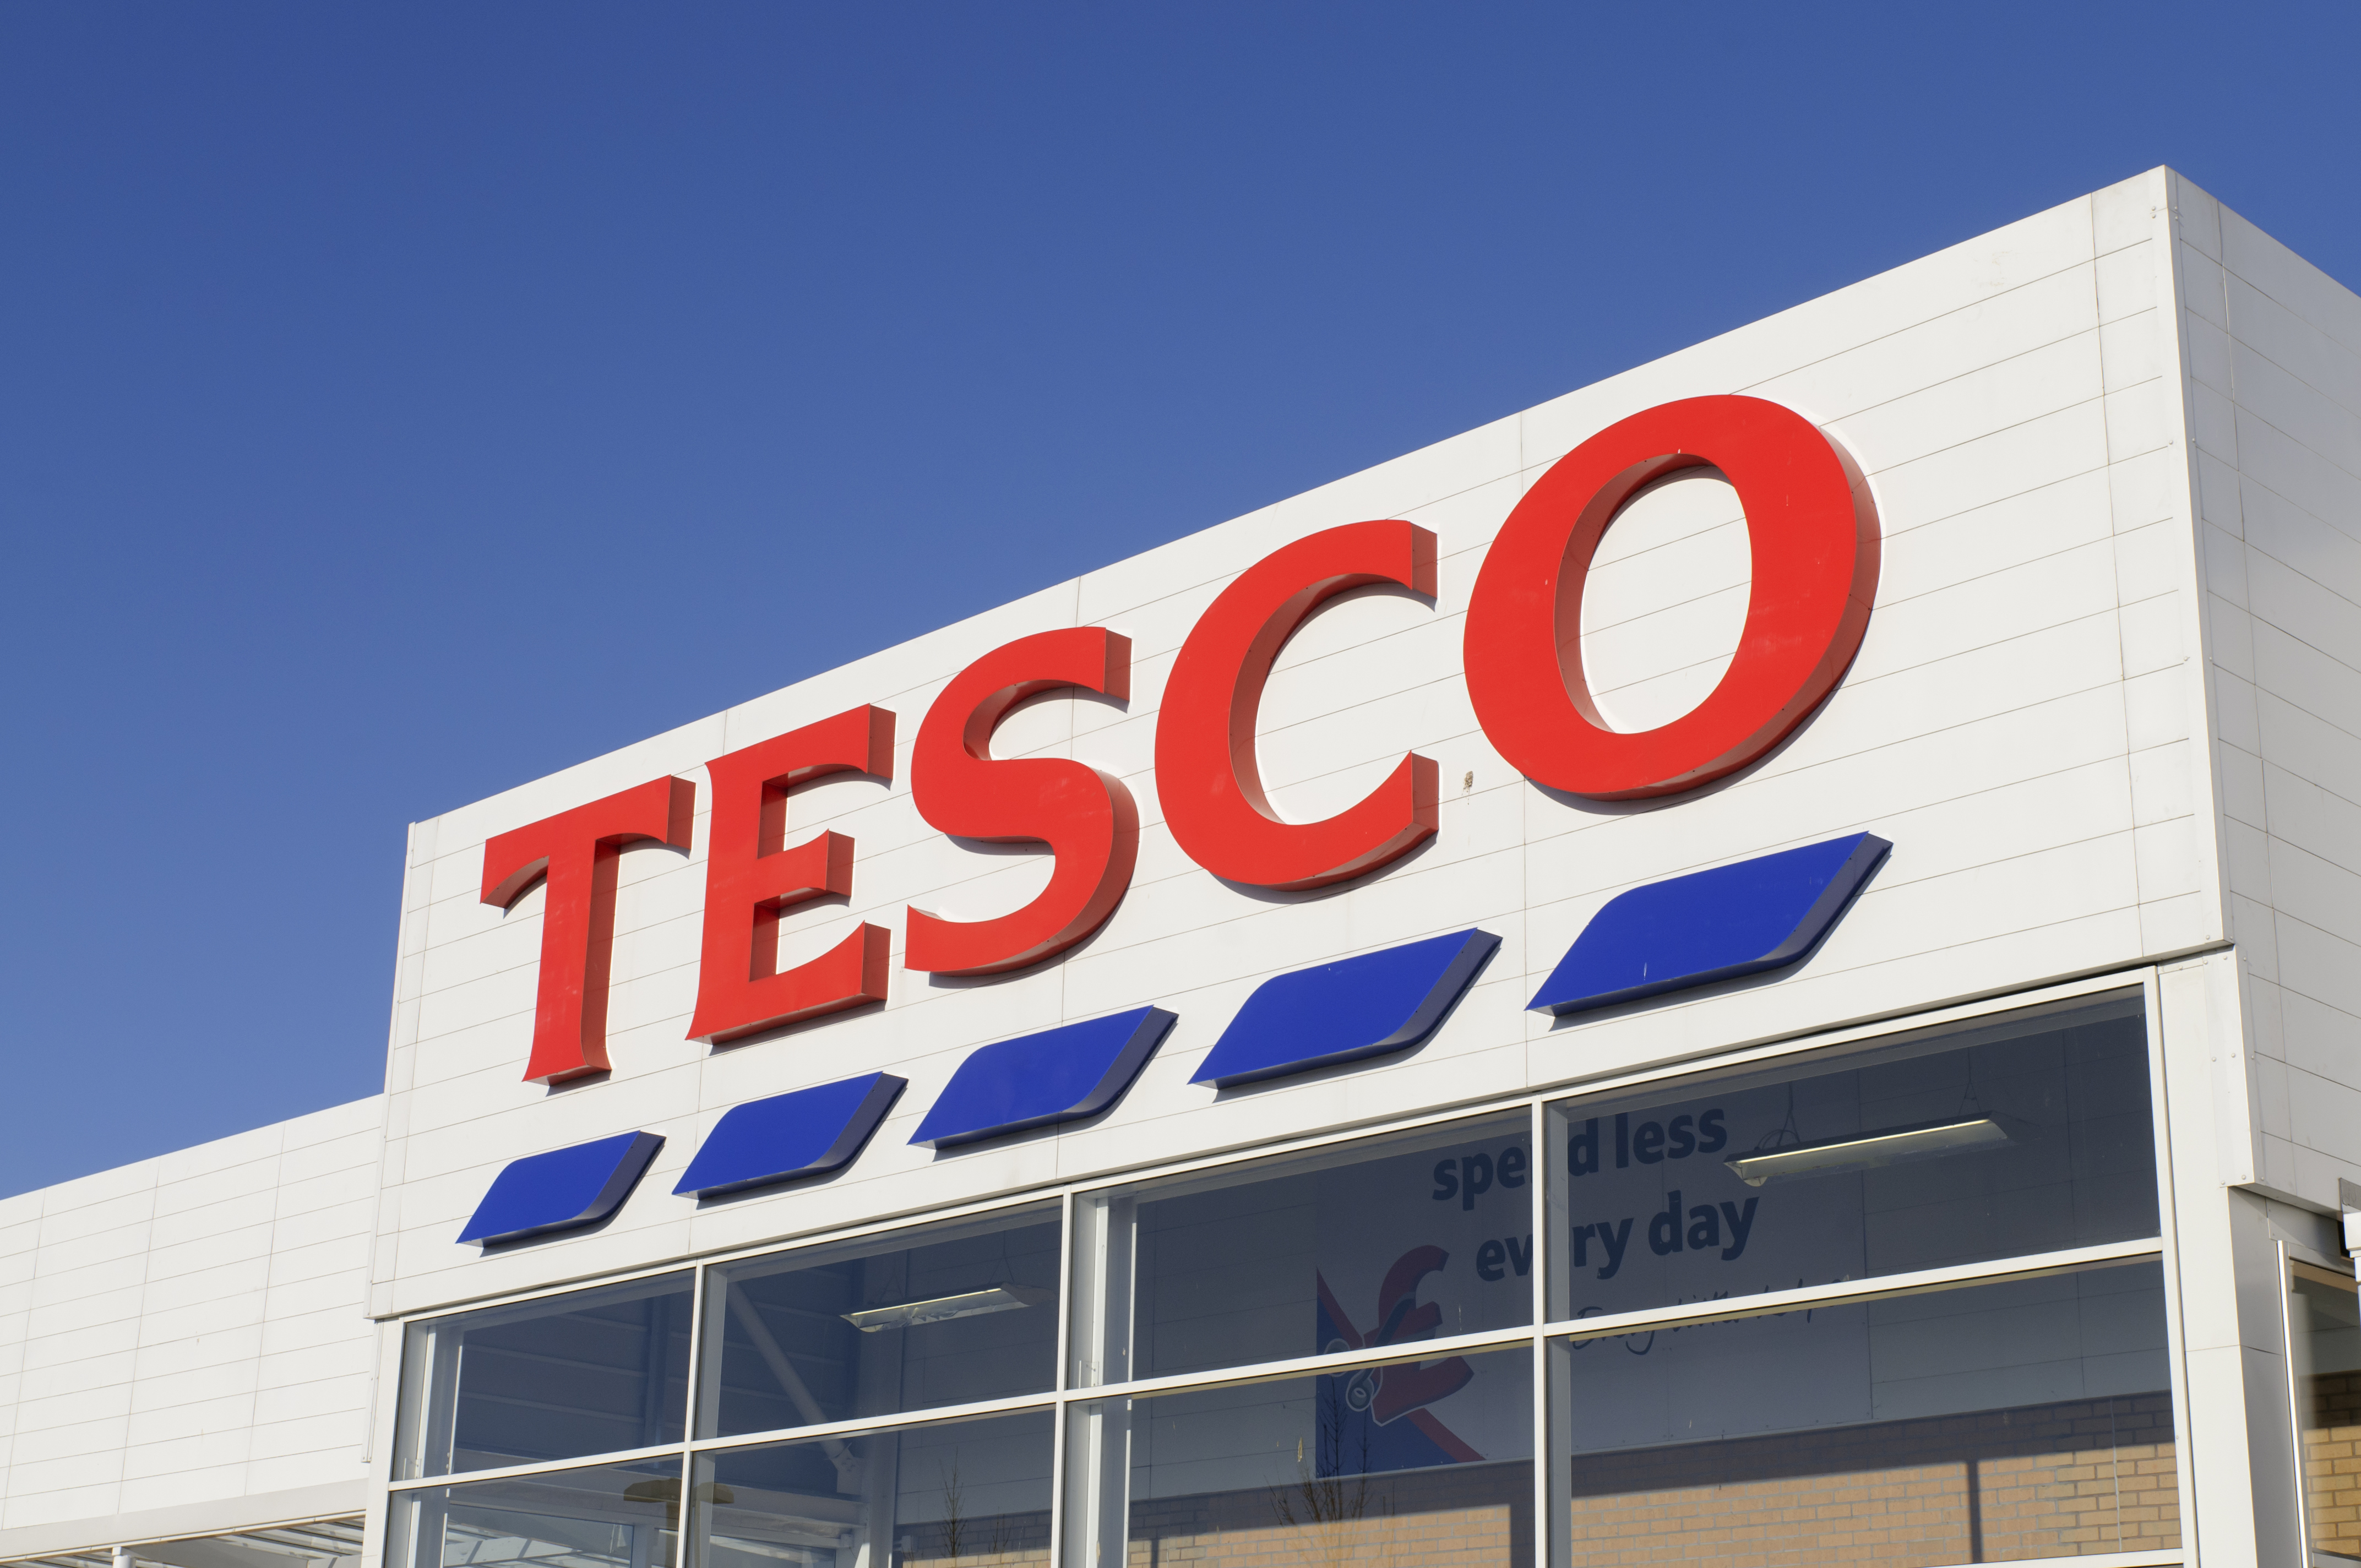 Tesco is also on the list of places with vouchers on off